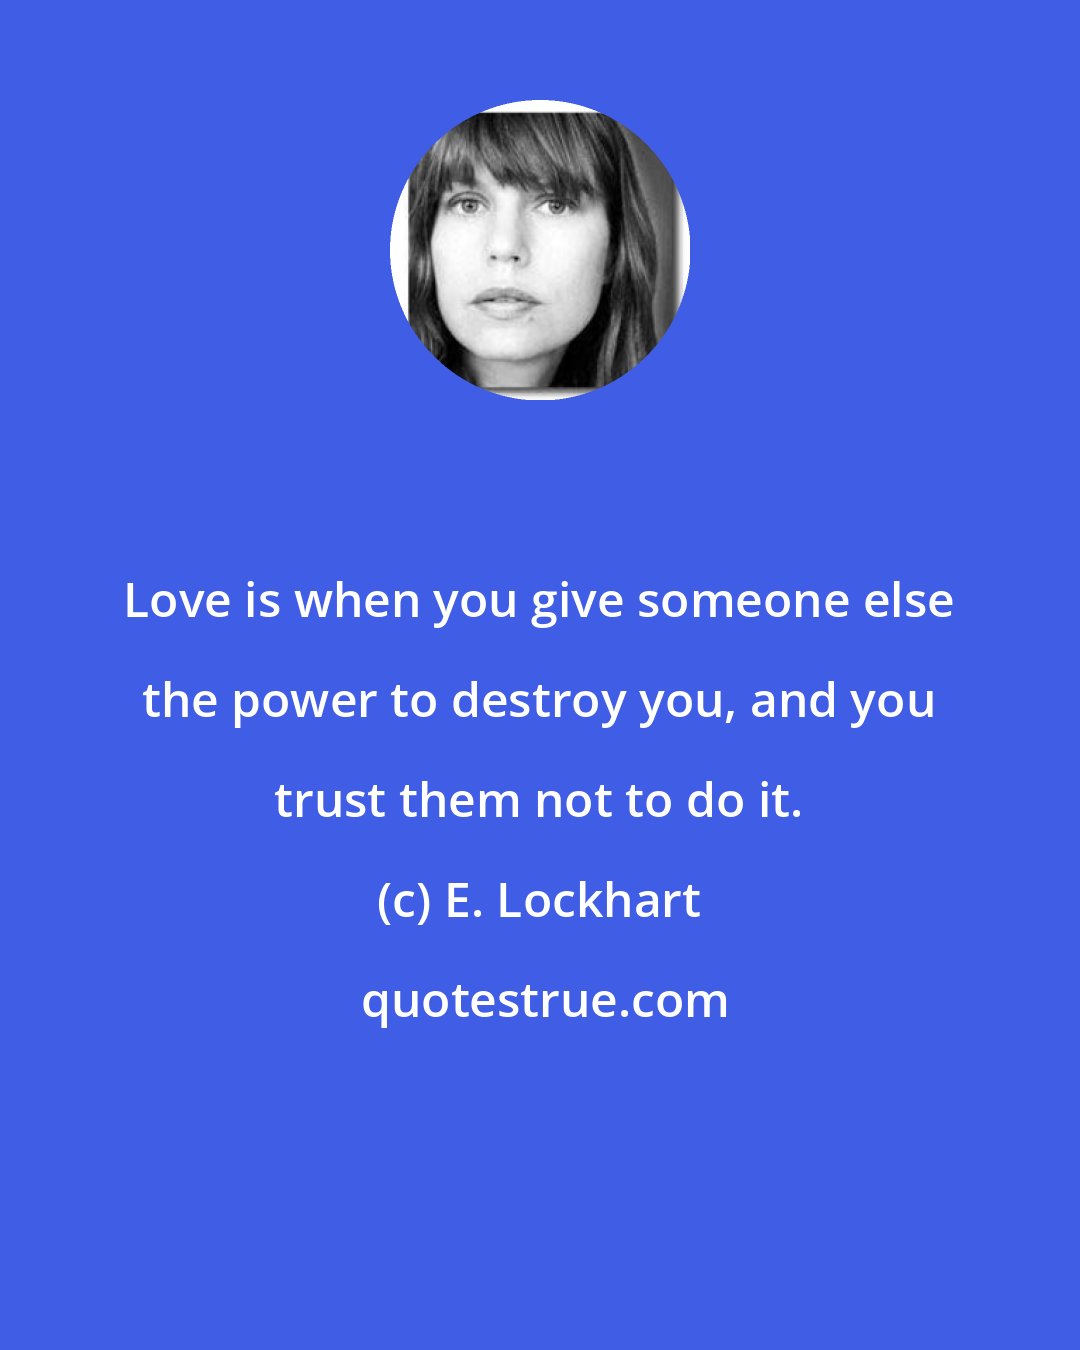 E. Lockhart: Love is when you give someone else the power to destroy you, and you trust them not to do it.